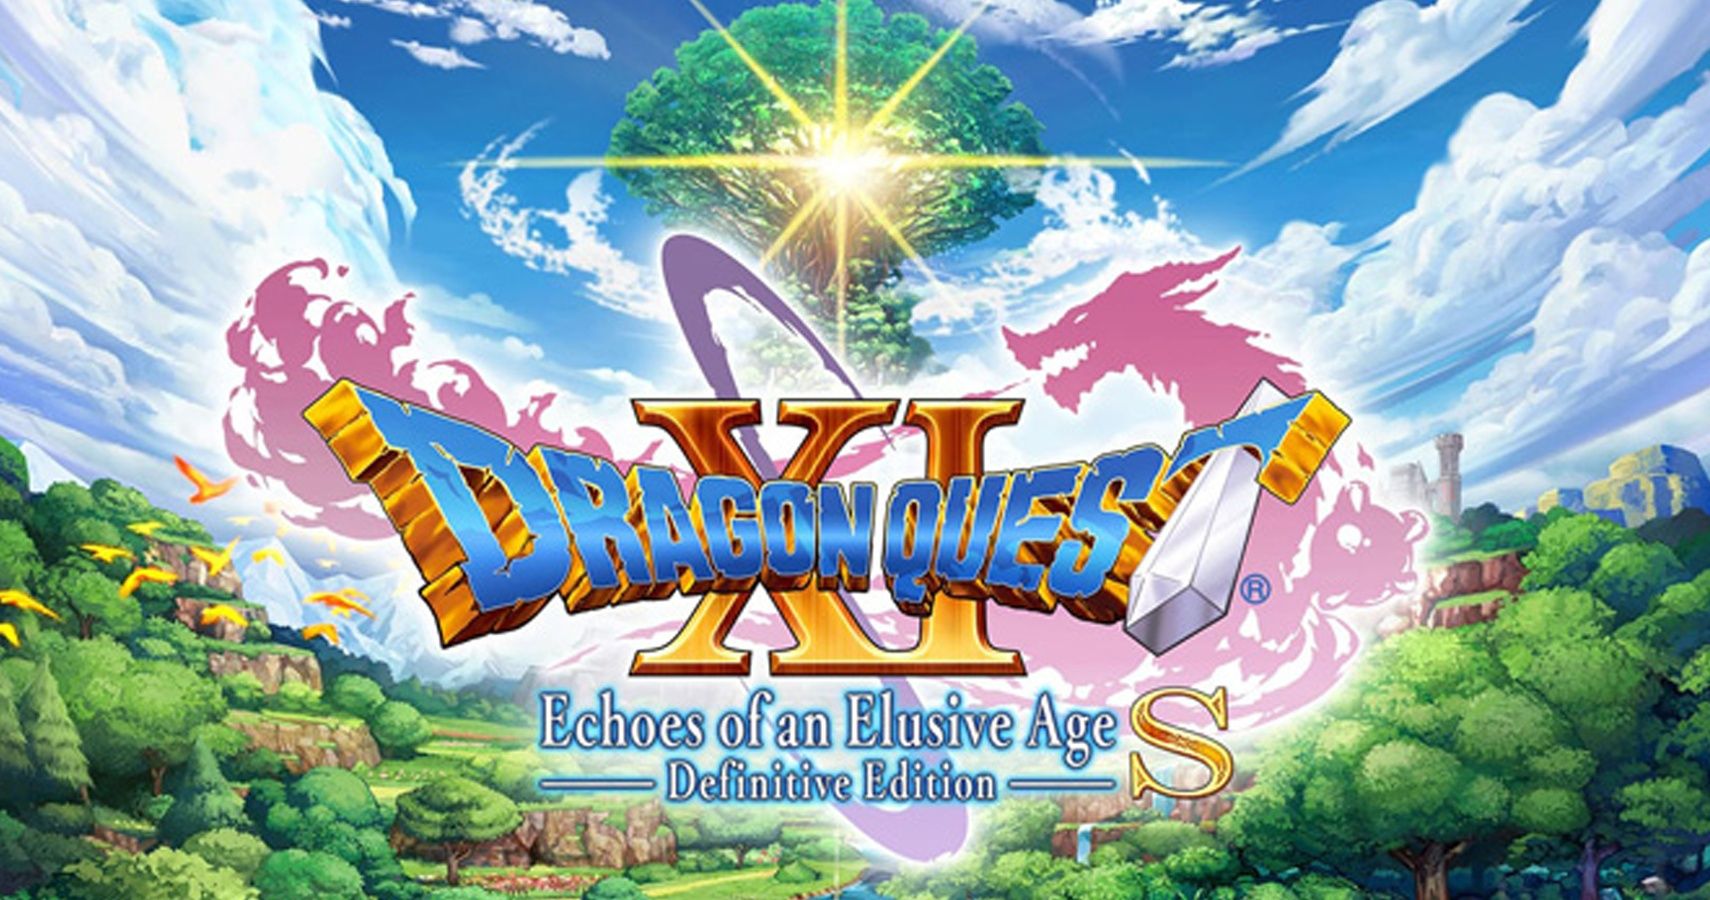 5 Things We Loved About Dragon Quest XI S (& 5 Things We Don’t)